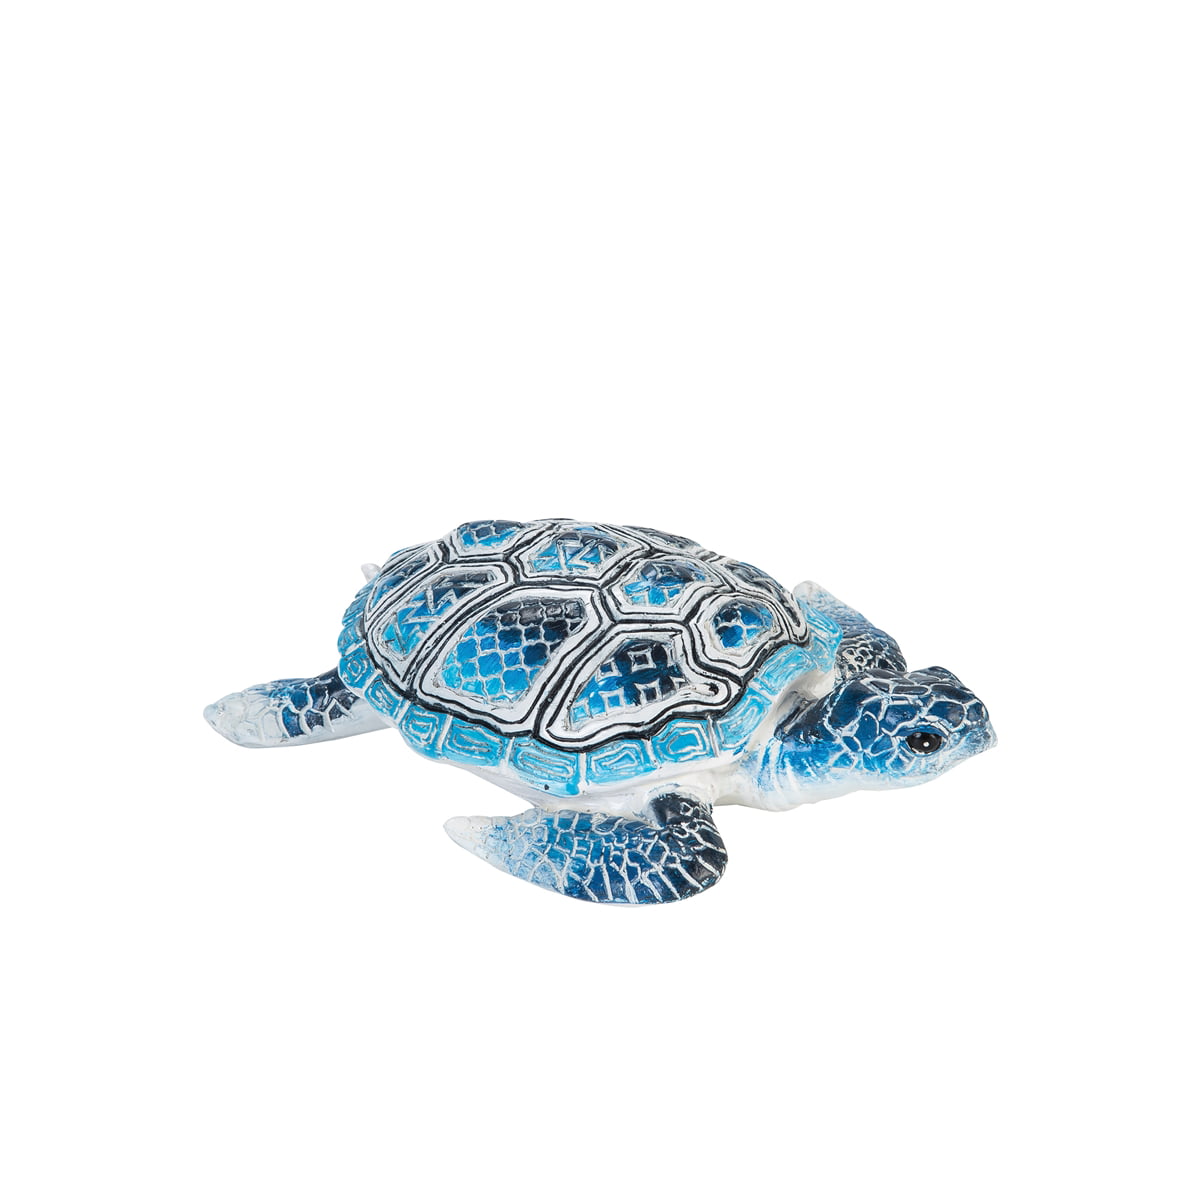 Blue Sea Turtle On Wave Figurine 5.5 Inch High Resin Statue New 